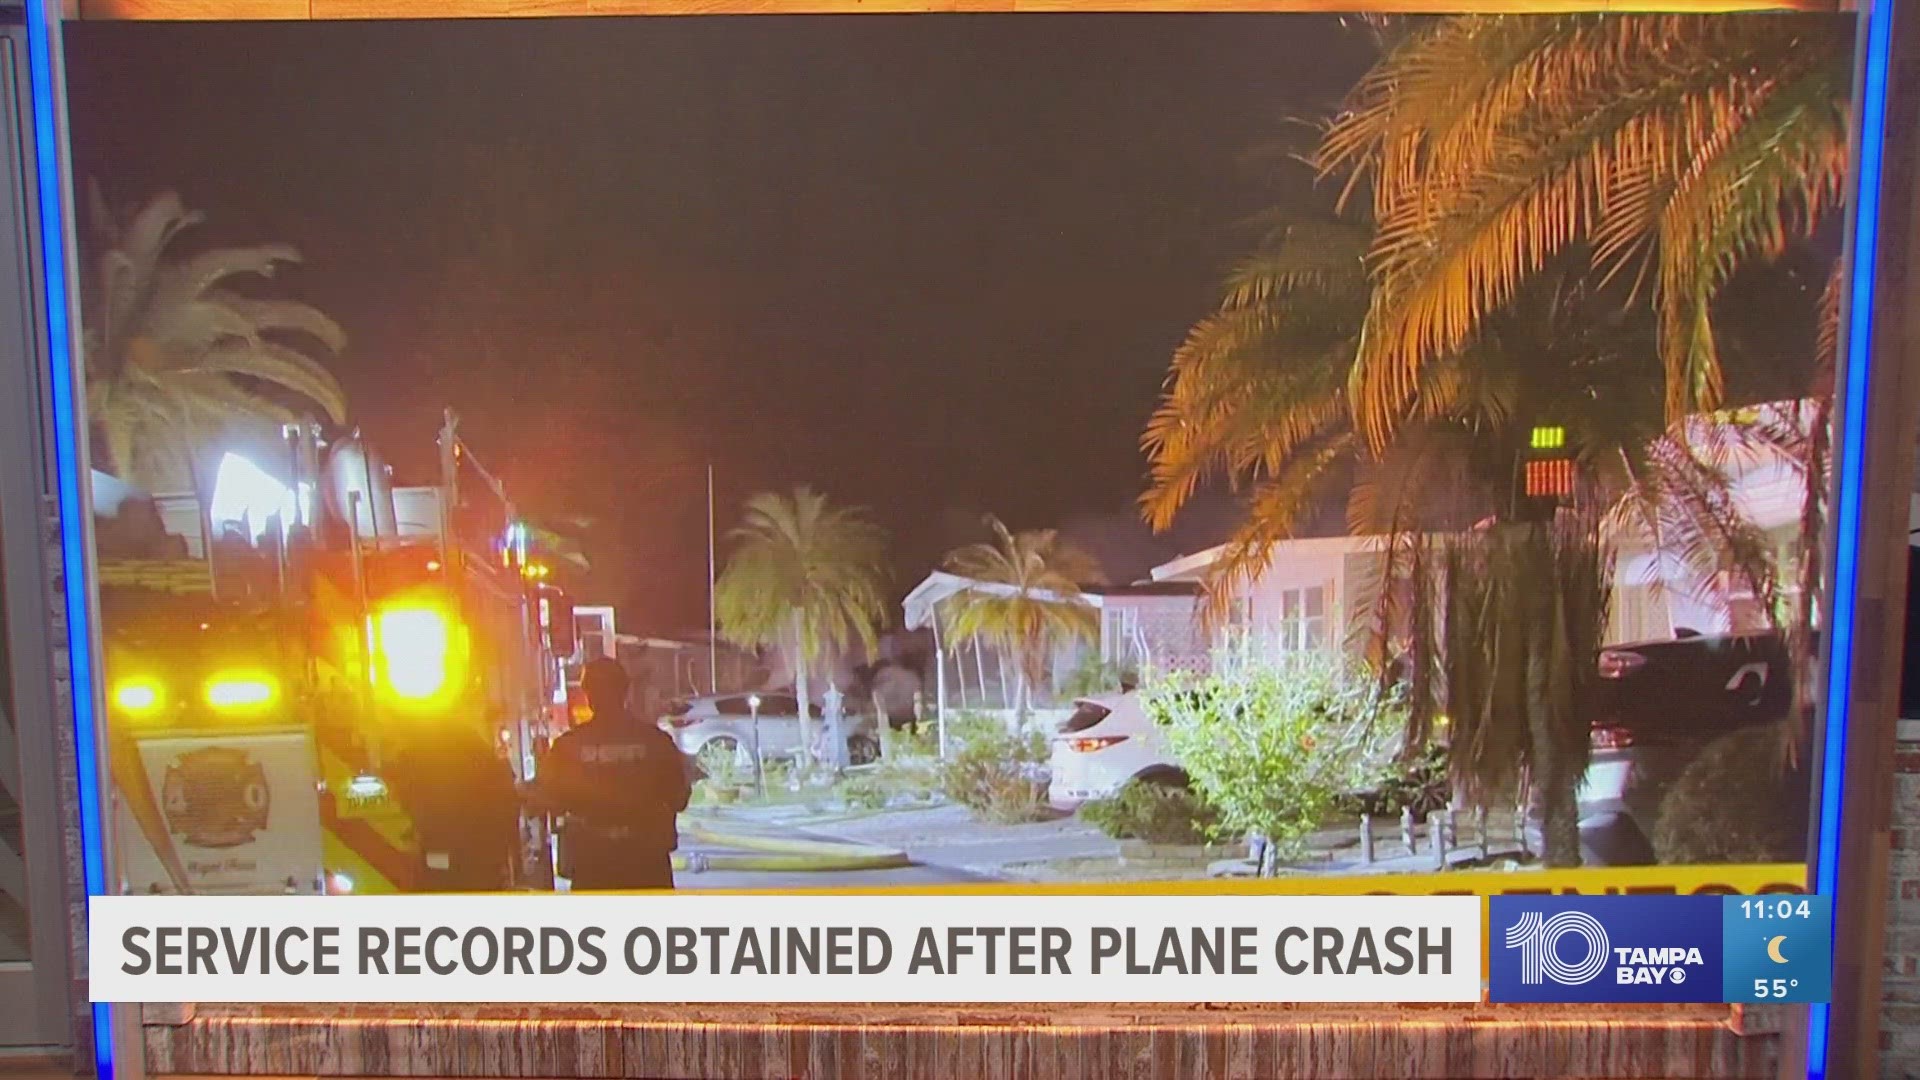 The plane's pilot reported having issues upon approach to the Tampa Bay area.